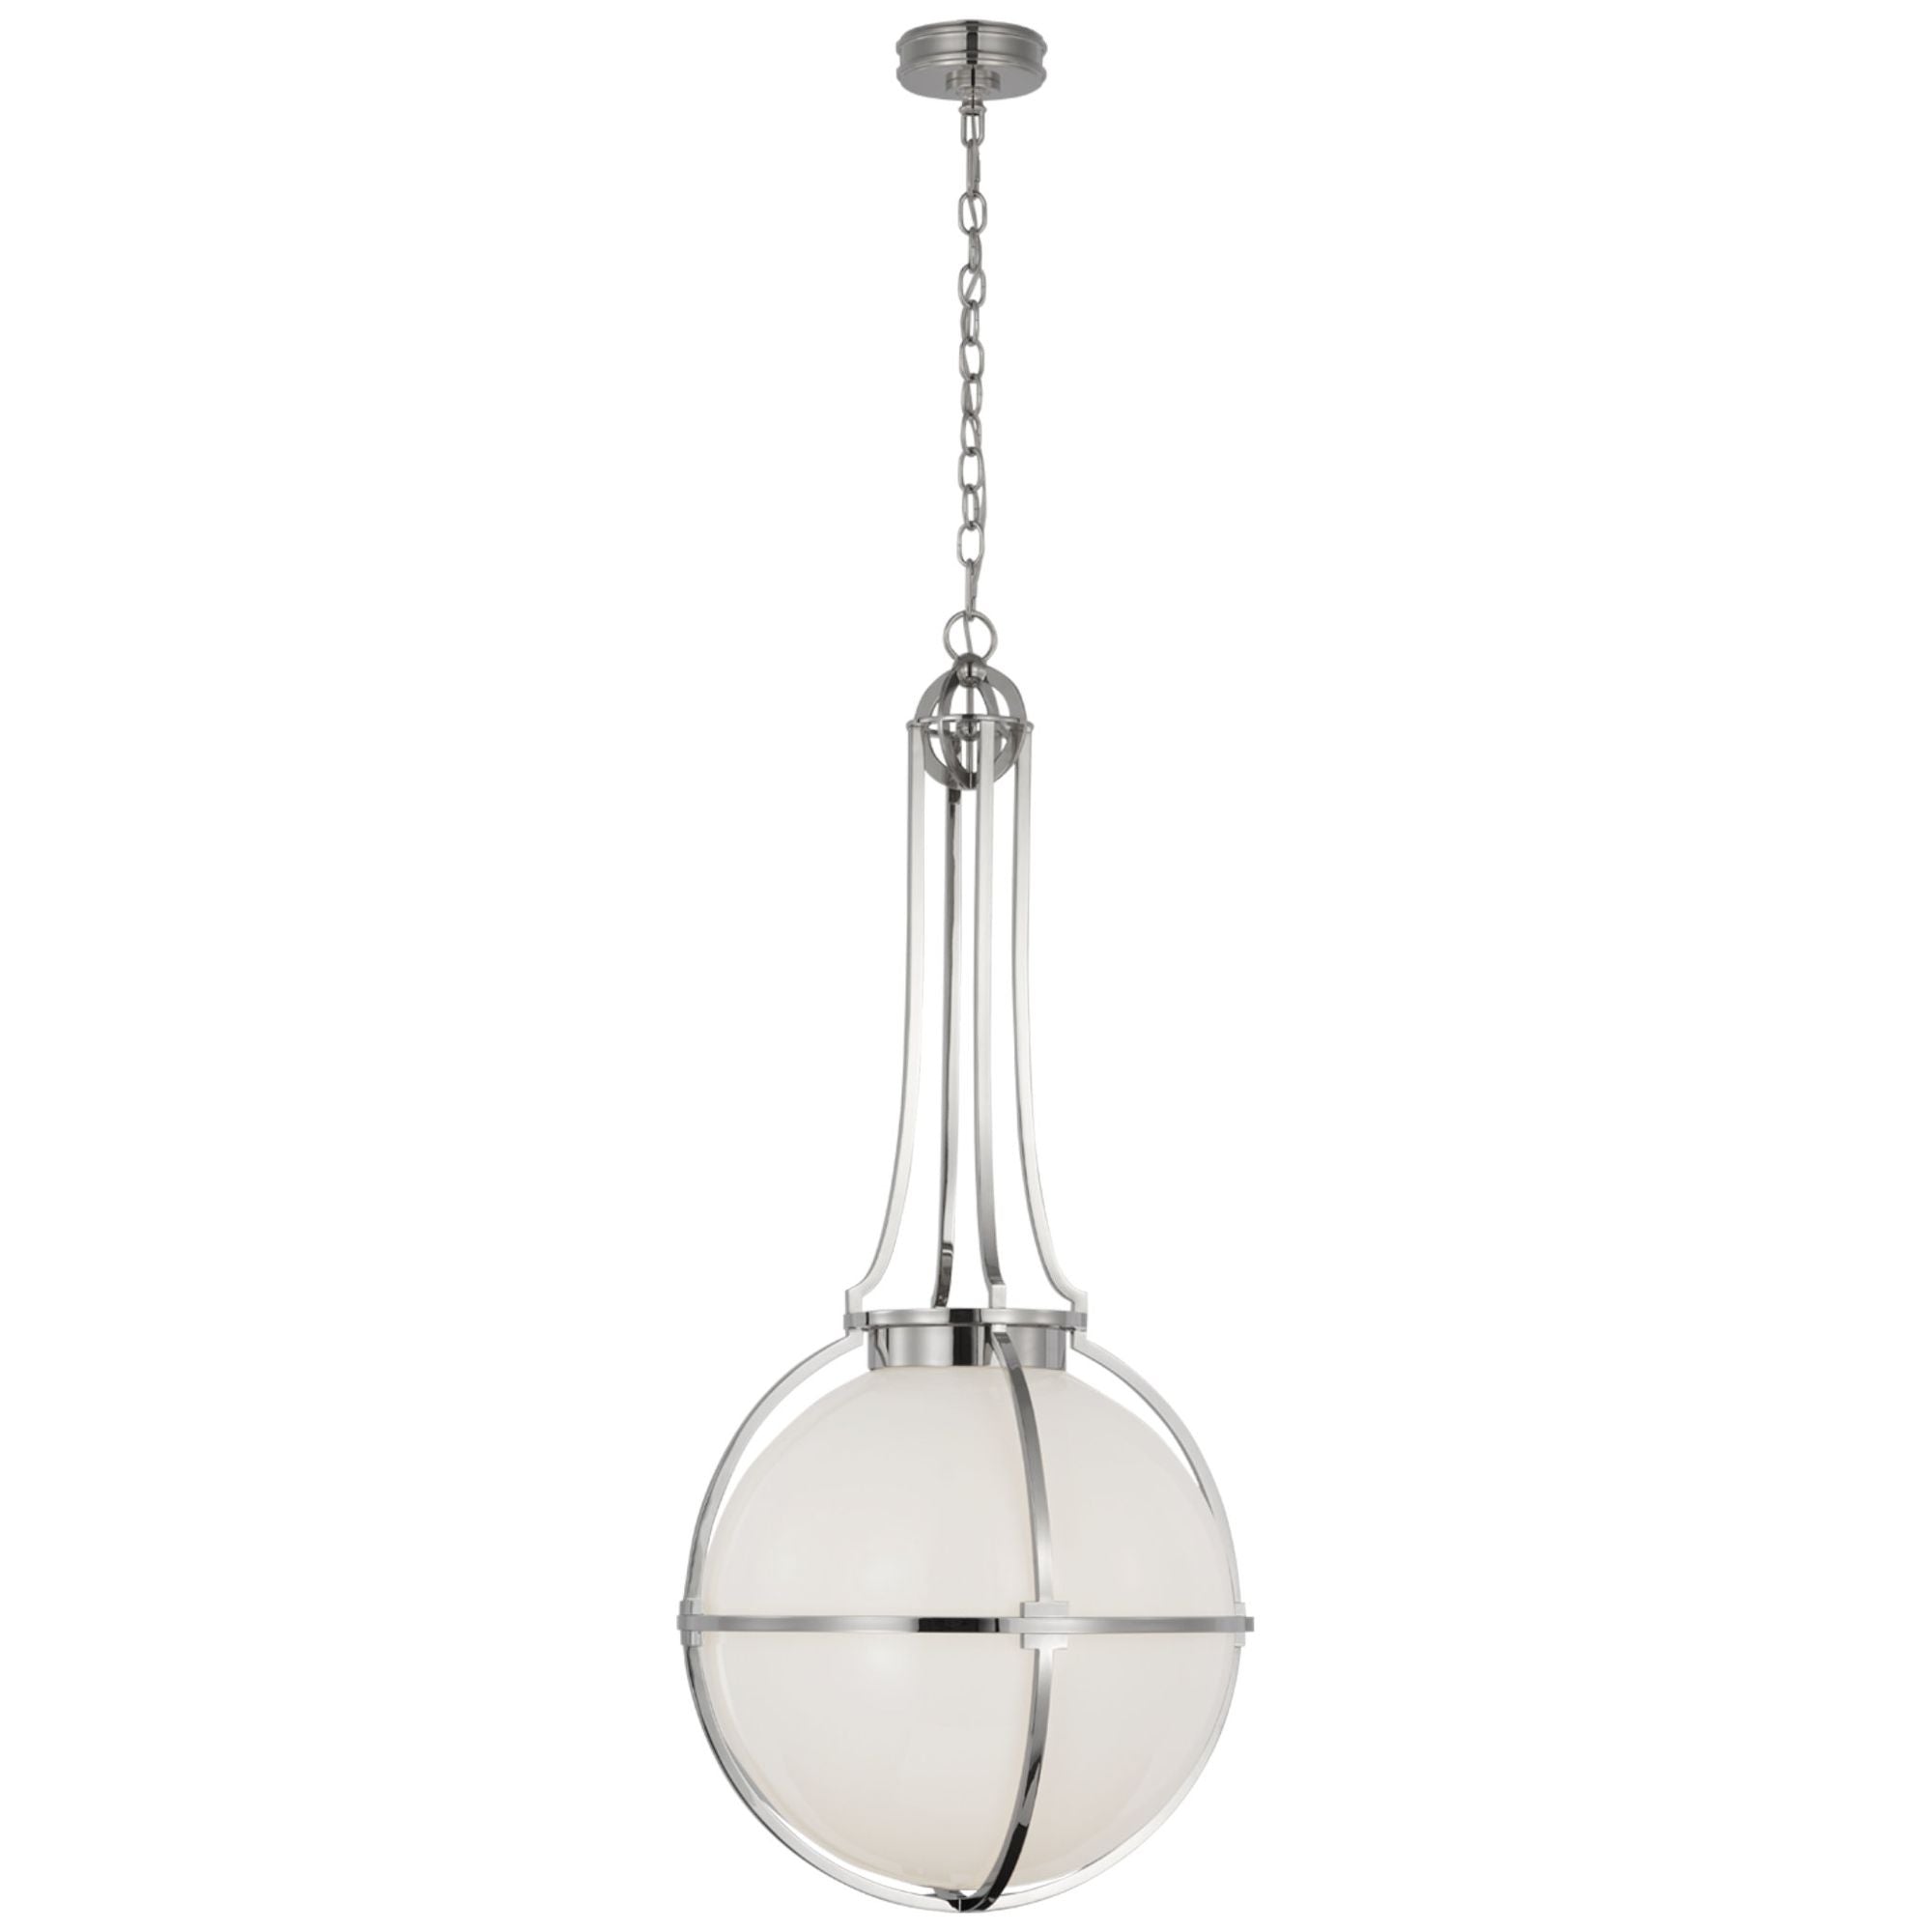 Chapman & Myers Gracie Large Captured Globe Pendant in Polished Nickel with White Glass